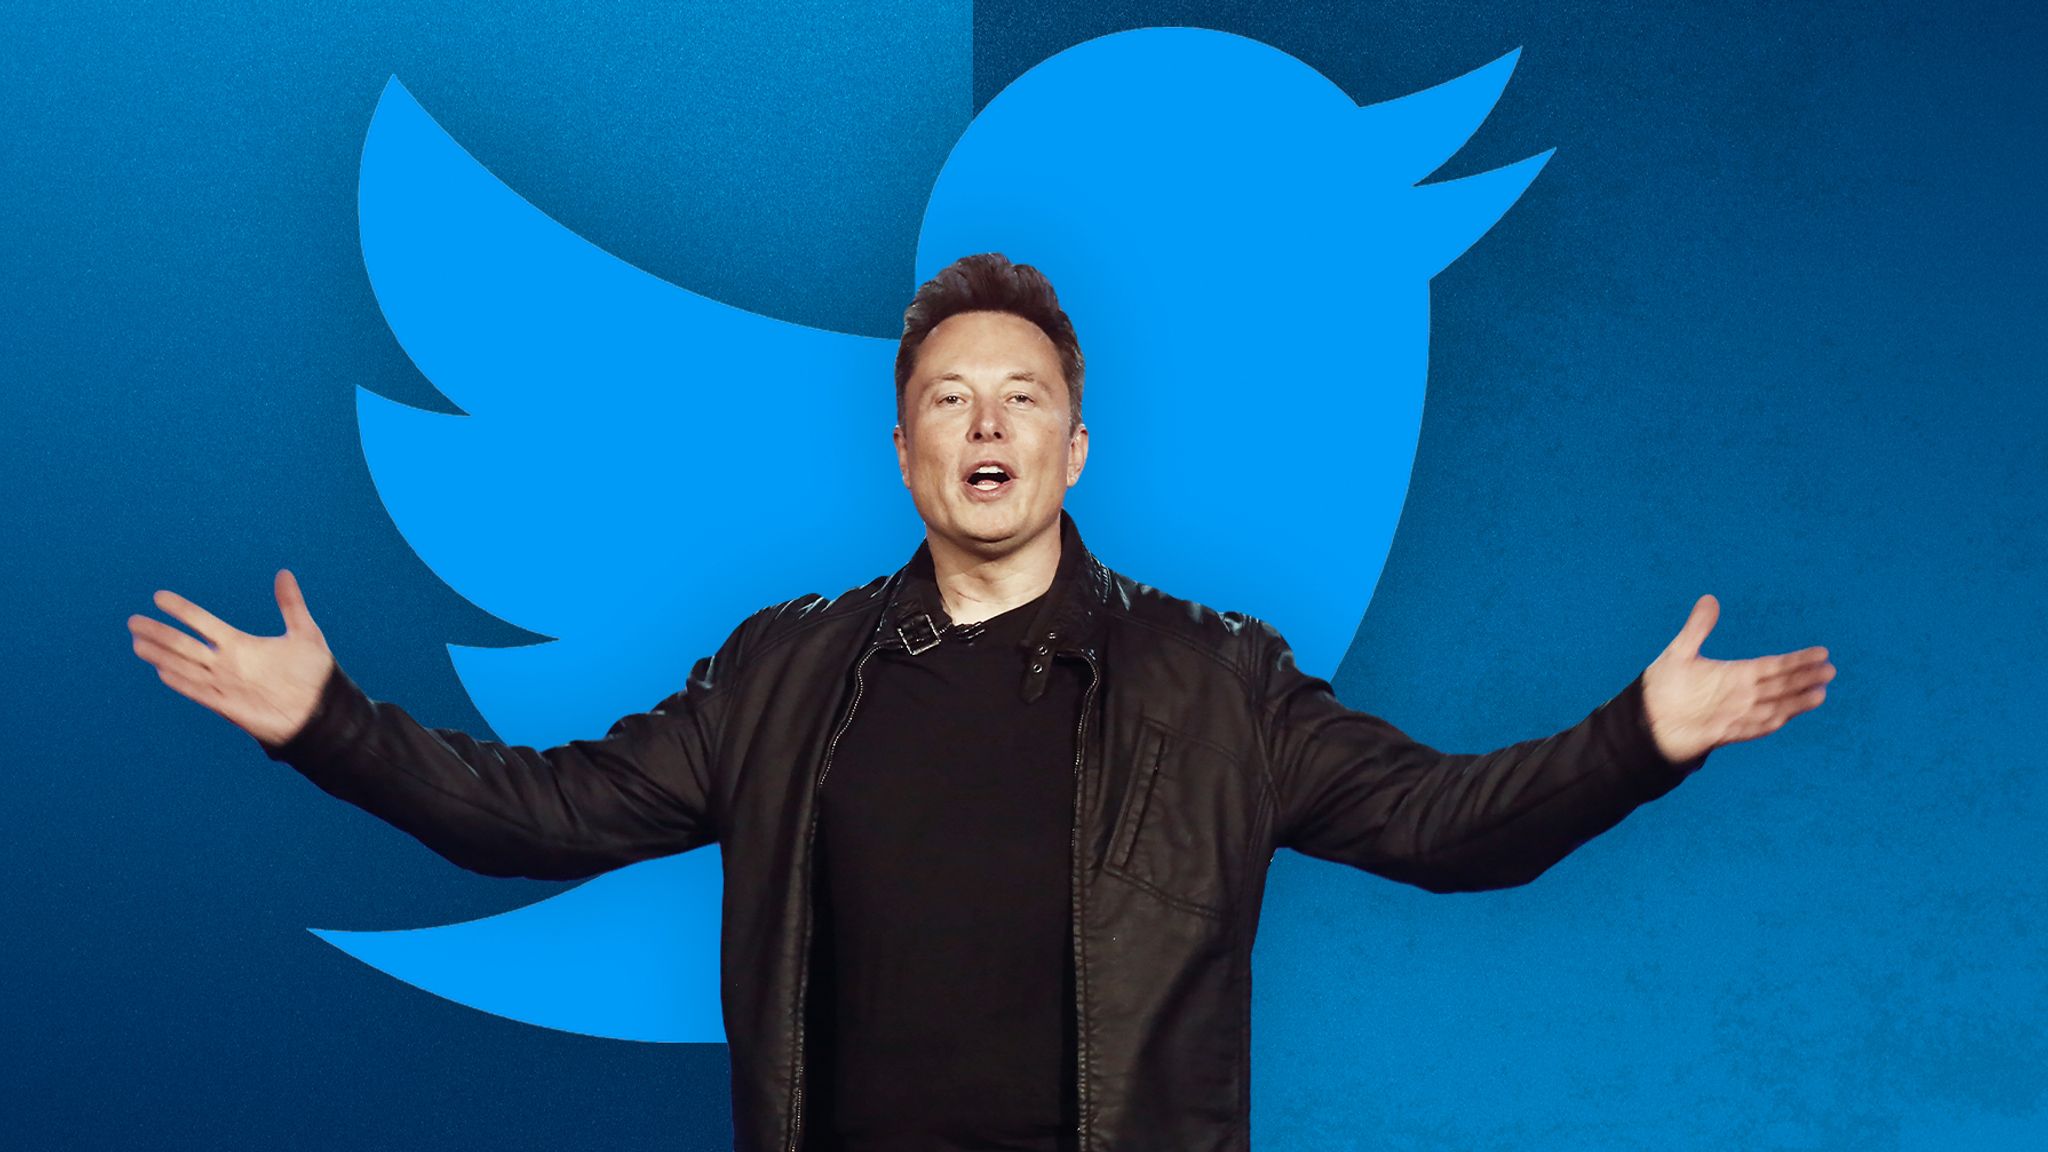 Elon Musk, Twitter, Tesla, and SpaceX CEO